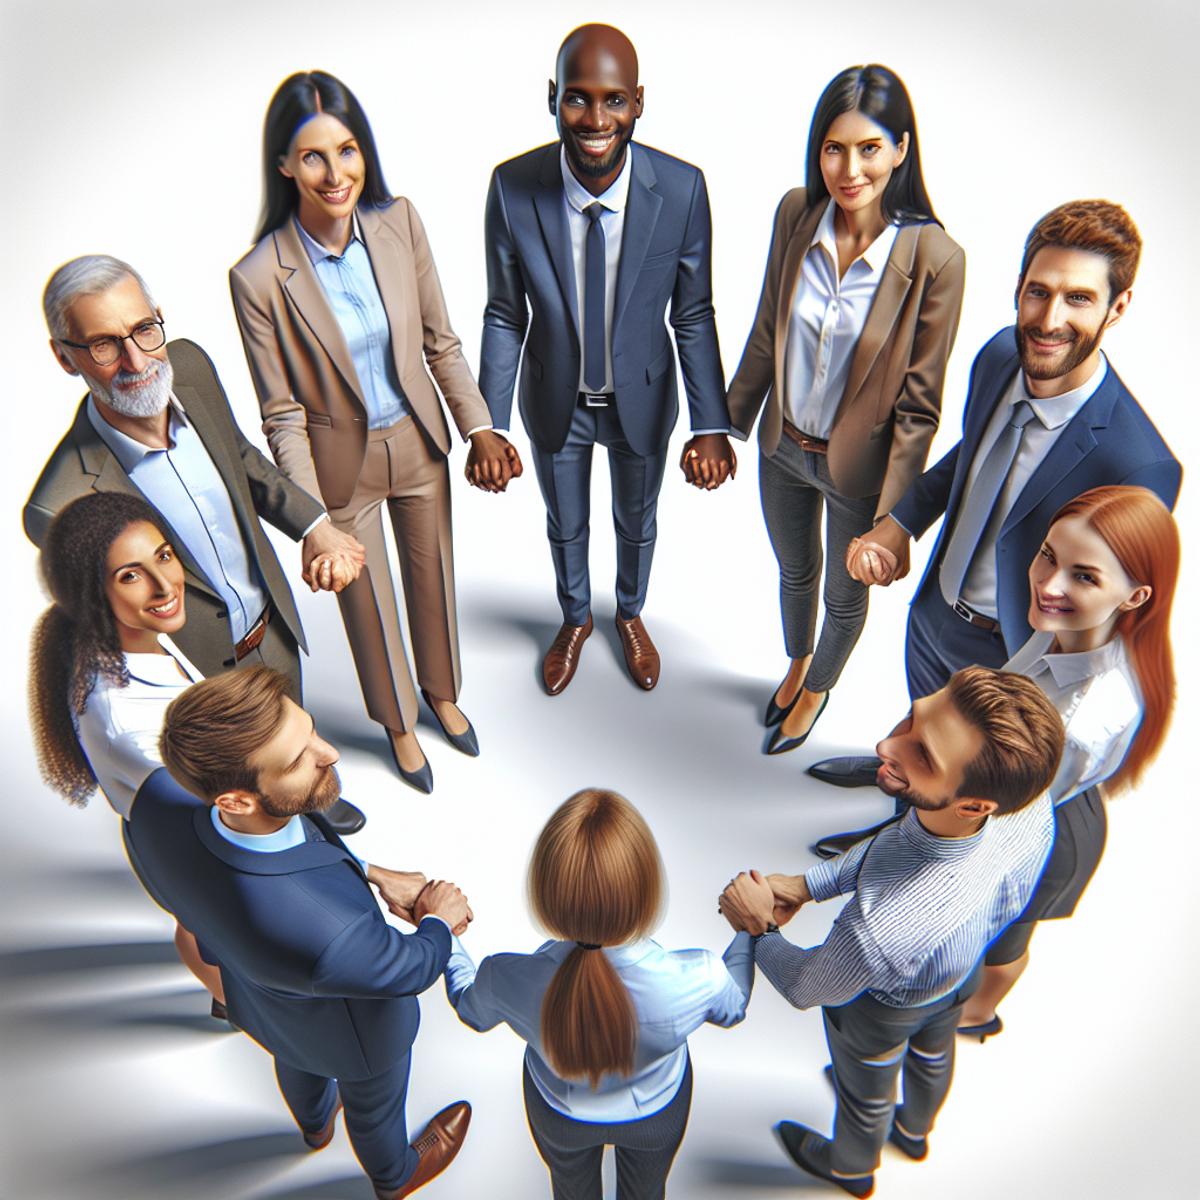 A diverse group of professionals from different descents holding hands in unity and collaboration, dressed in business attire.